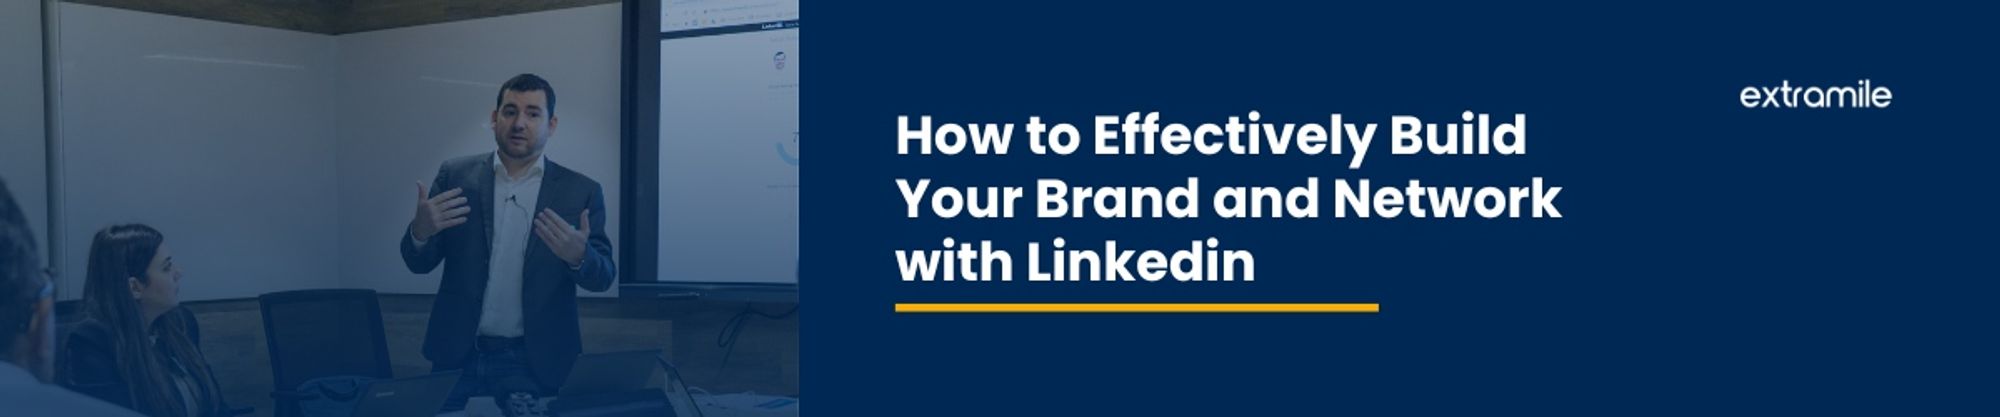 How to Effectively Build Your Brand and Network with LinkedIn